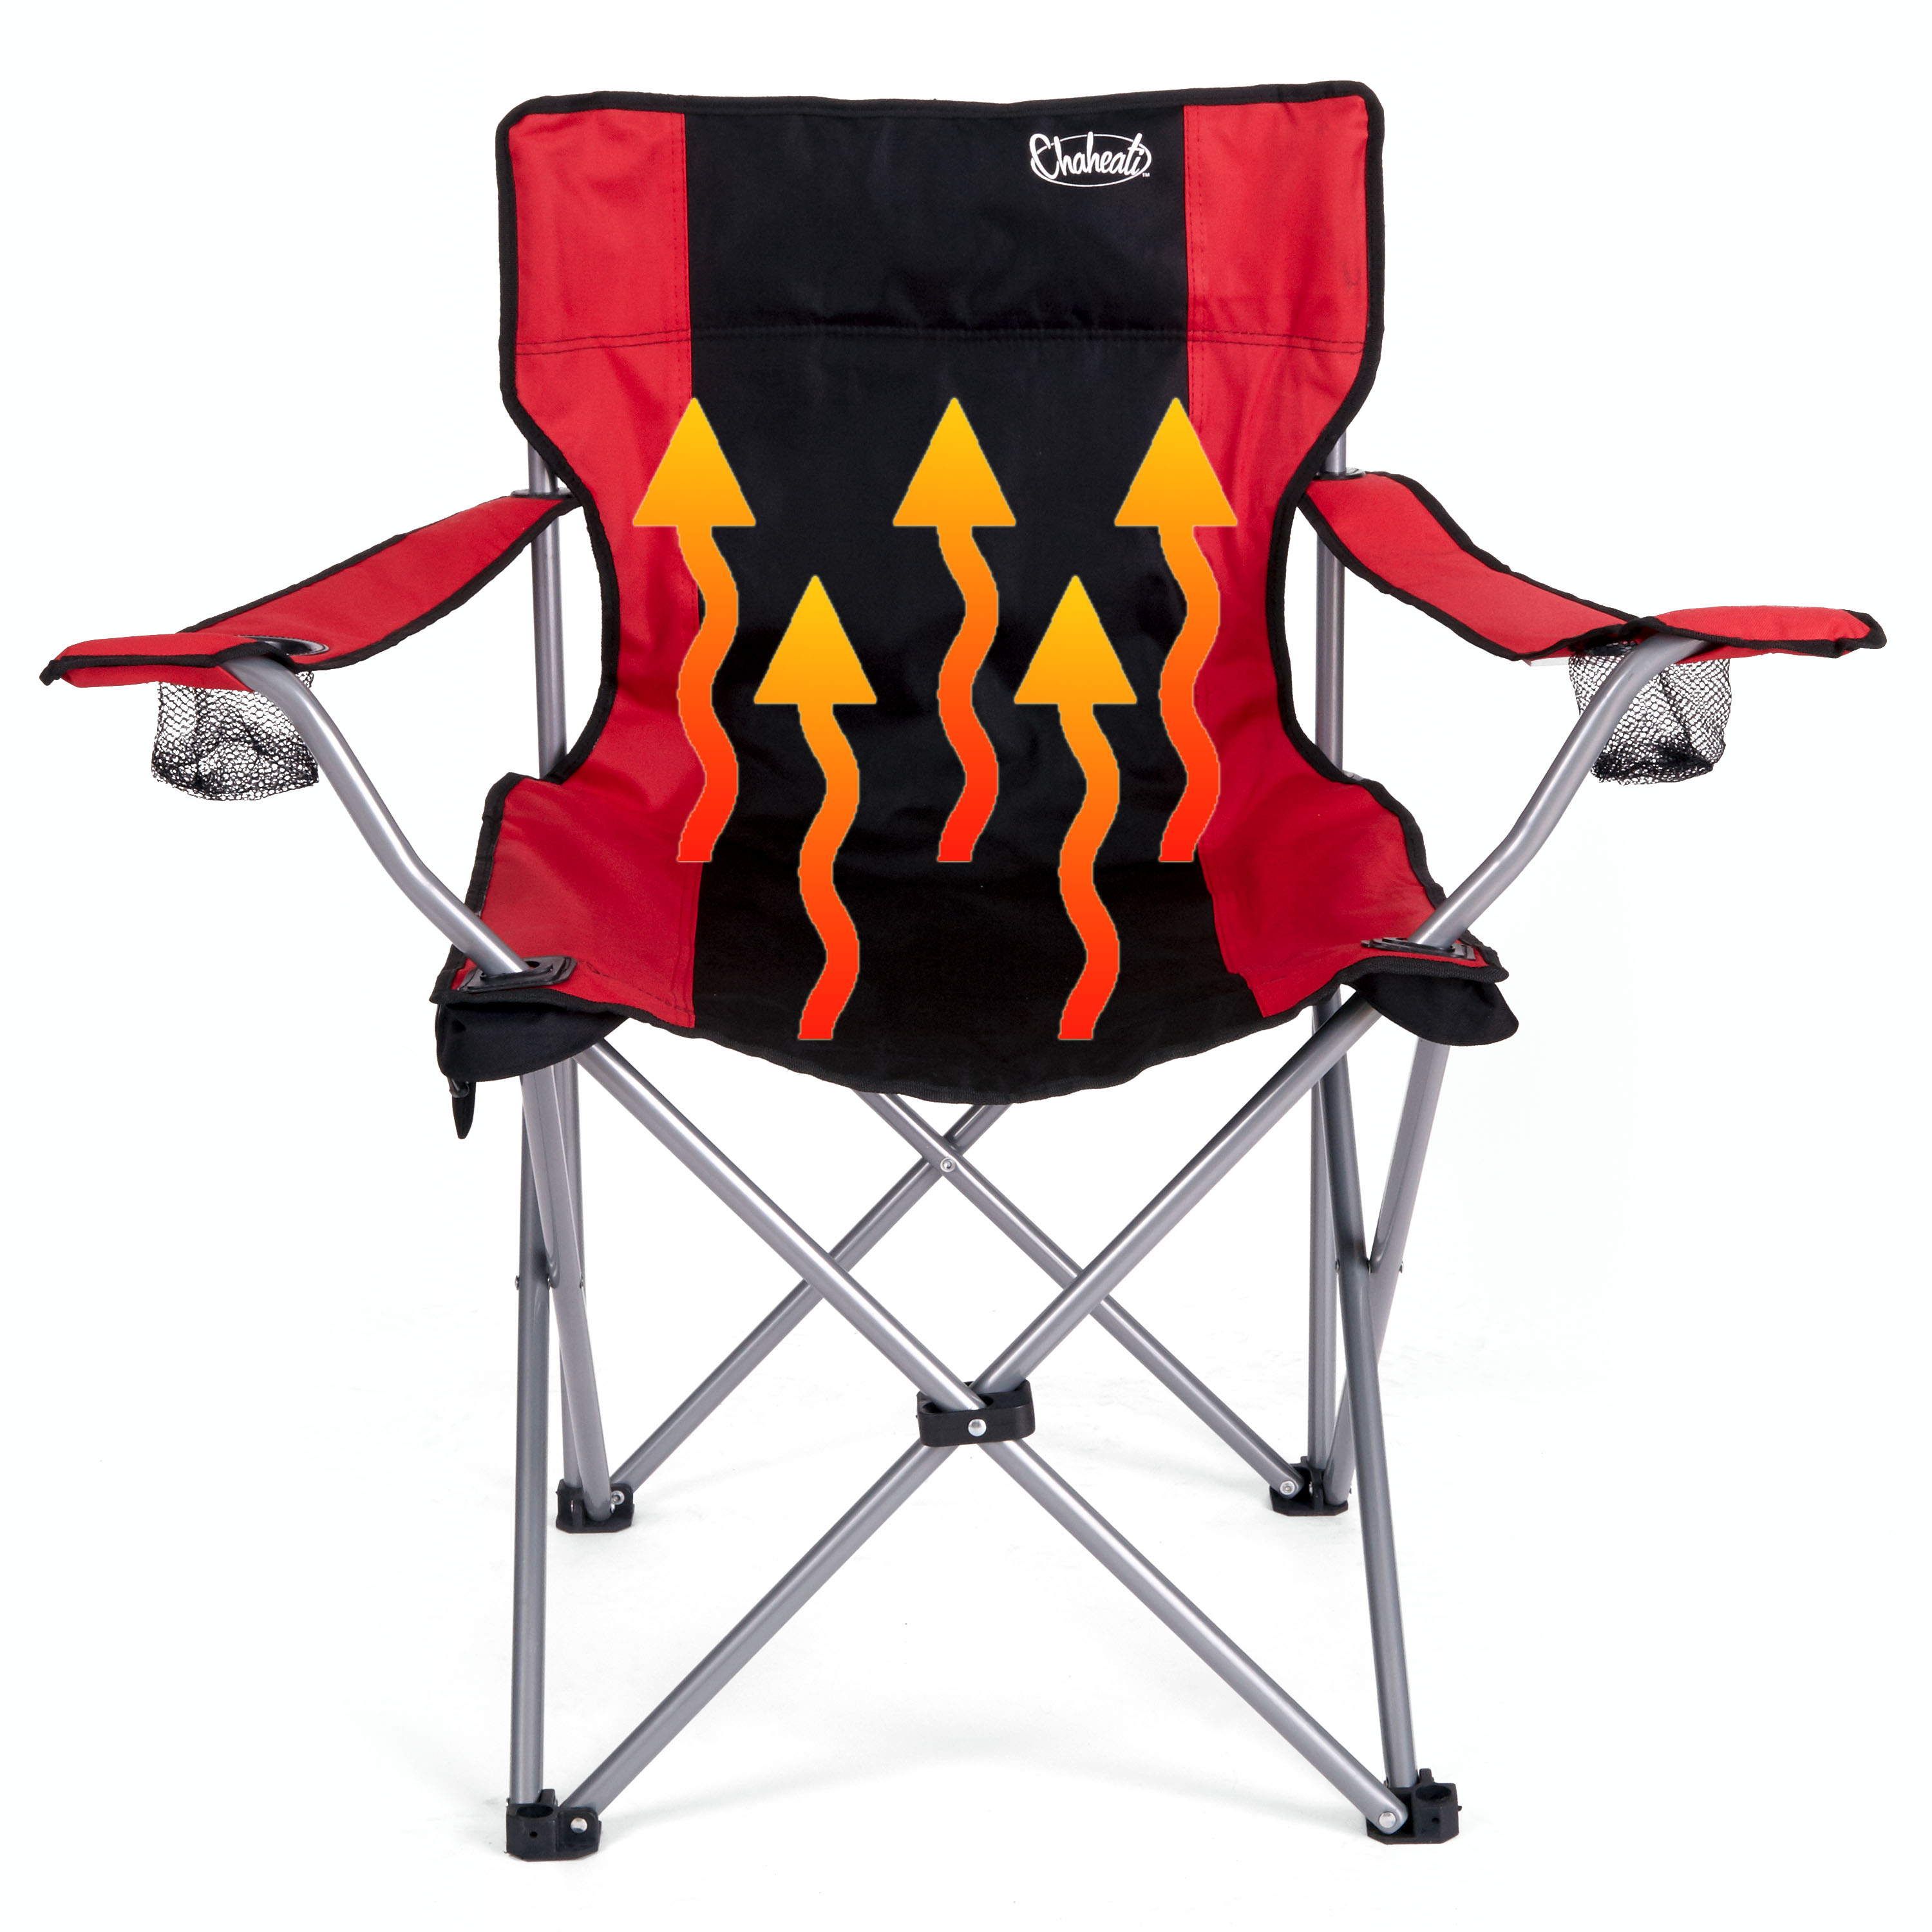 Chaheati The Heated Camping Chair World Of Camping Blog